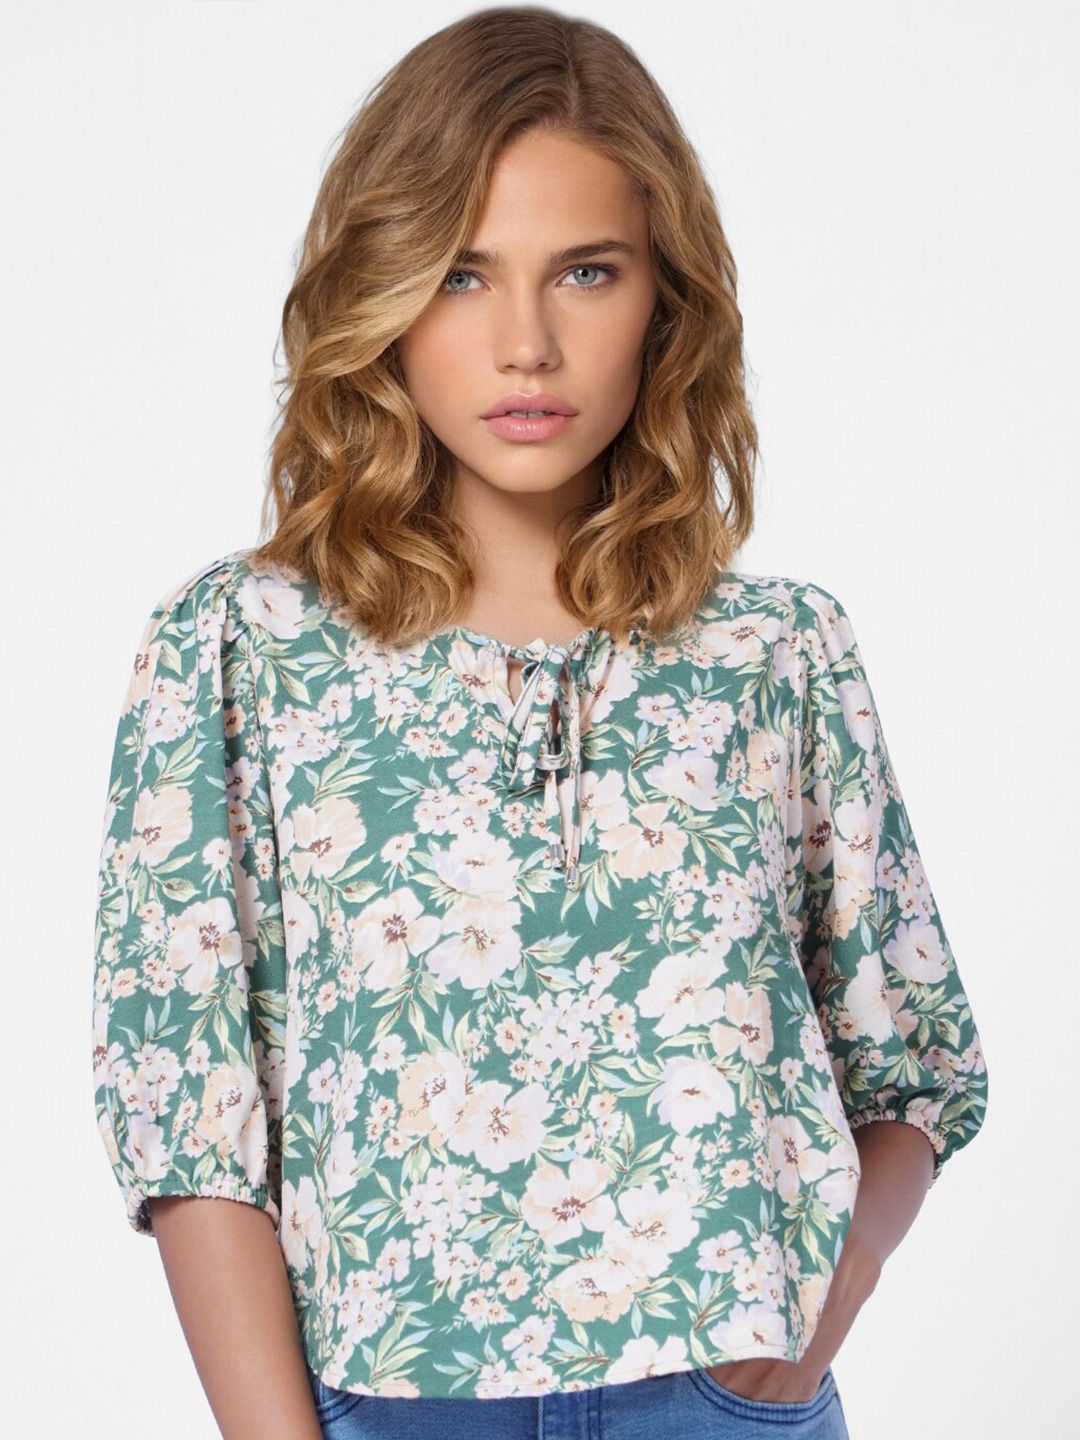 ONLY Green & White Floral Print Tie-Up Neck Blouson Top Price in India